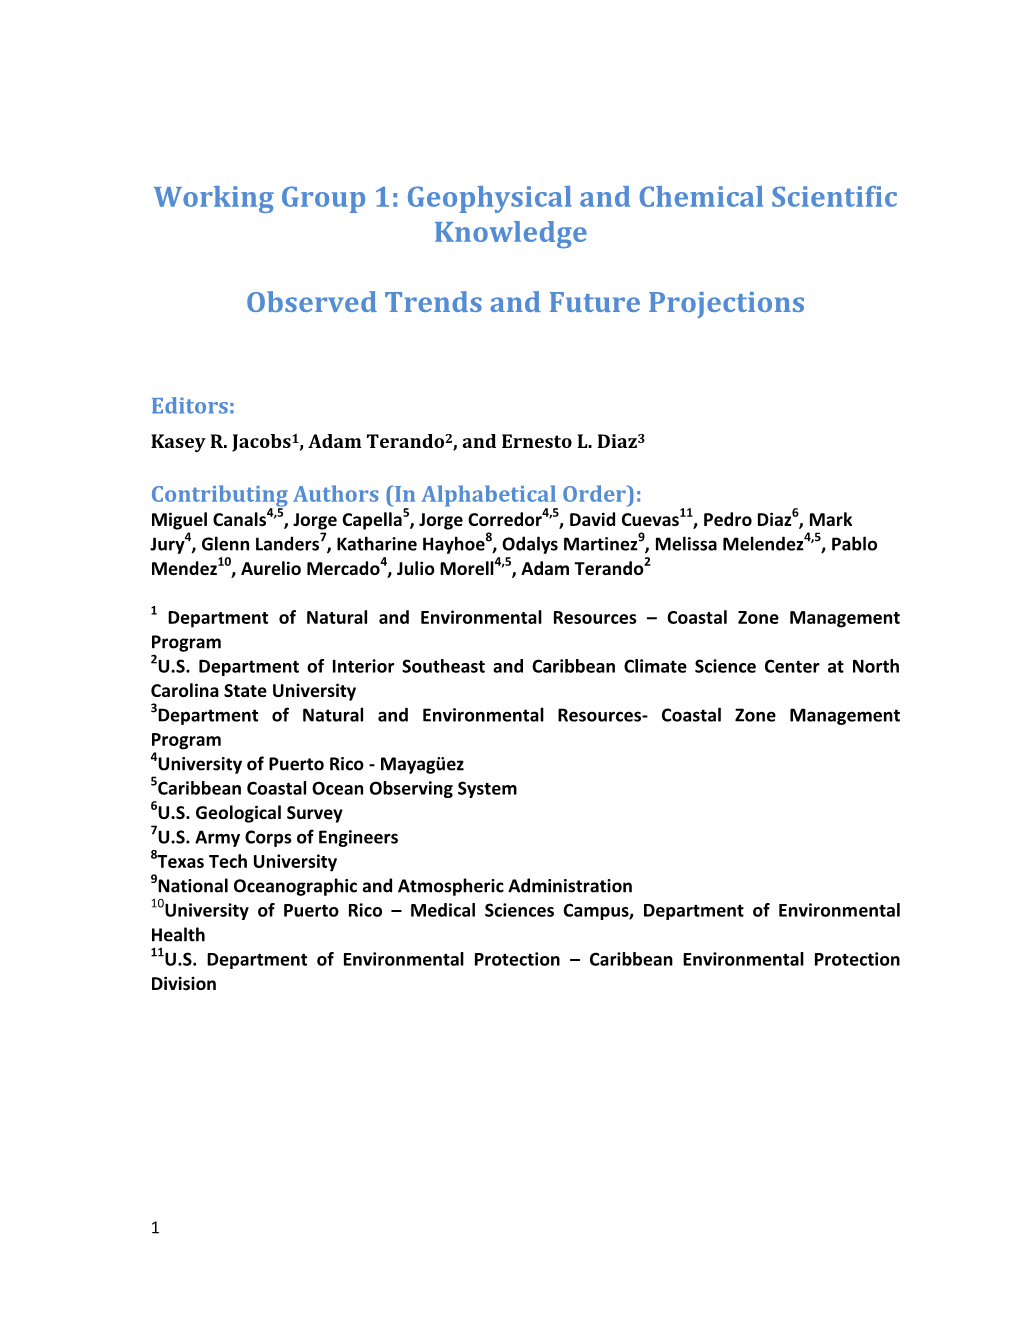 Geophysical and Chemical Scientific Knowledge Observed Trends And